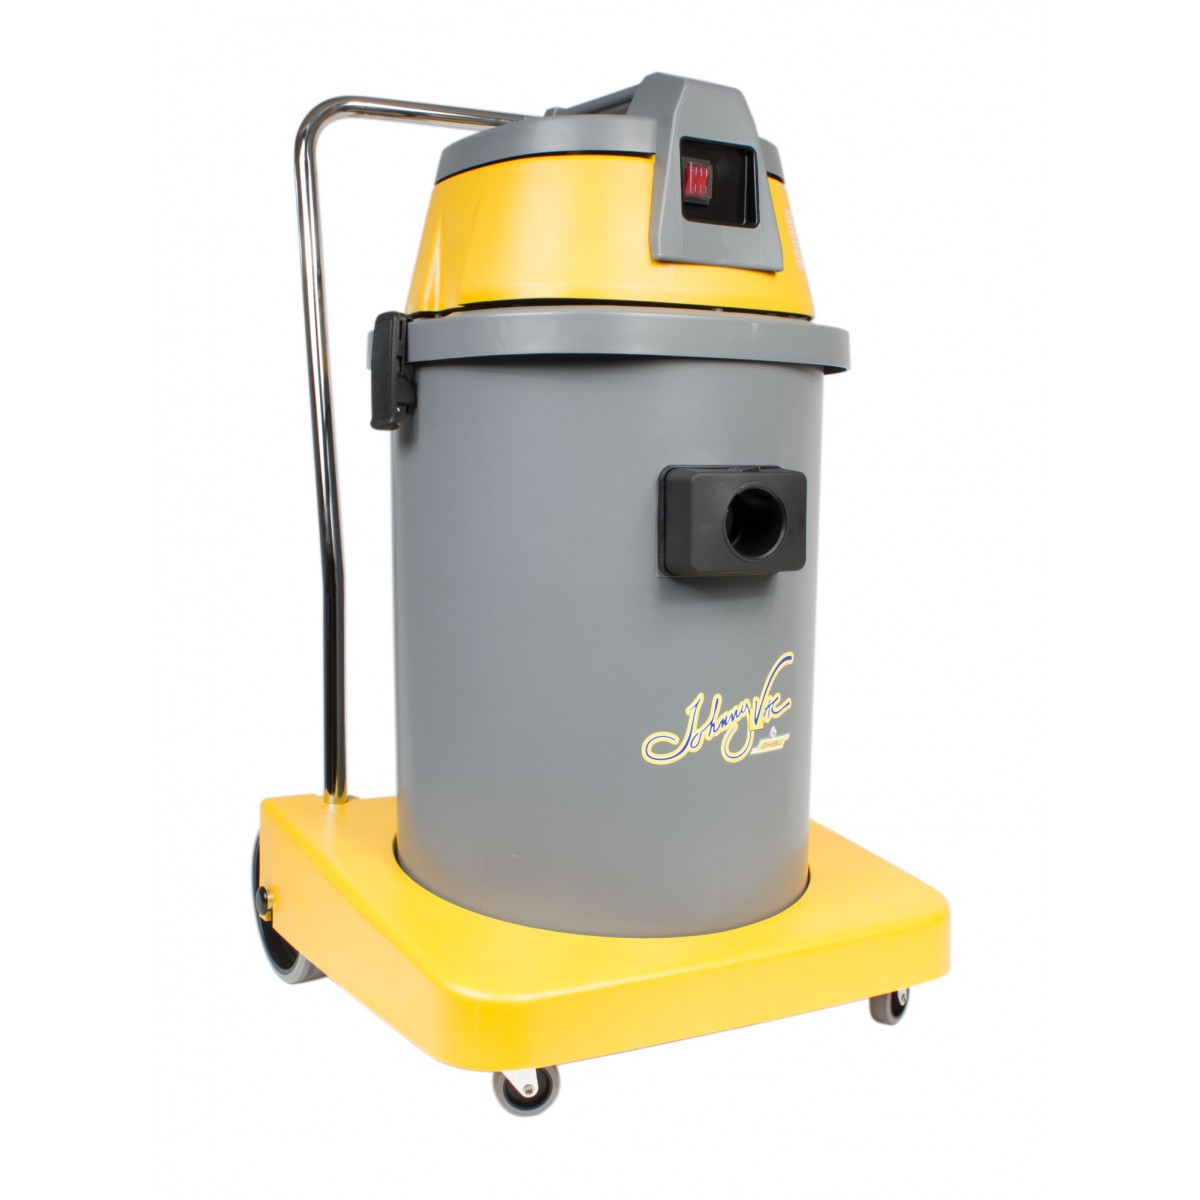 JV400 - Wet & Dry Commercial Vacuum - 10 Gal. 1200 W - Johnny Vac - Side View